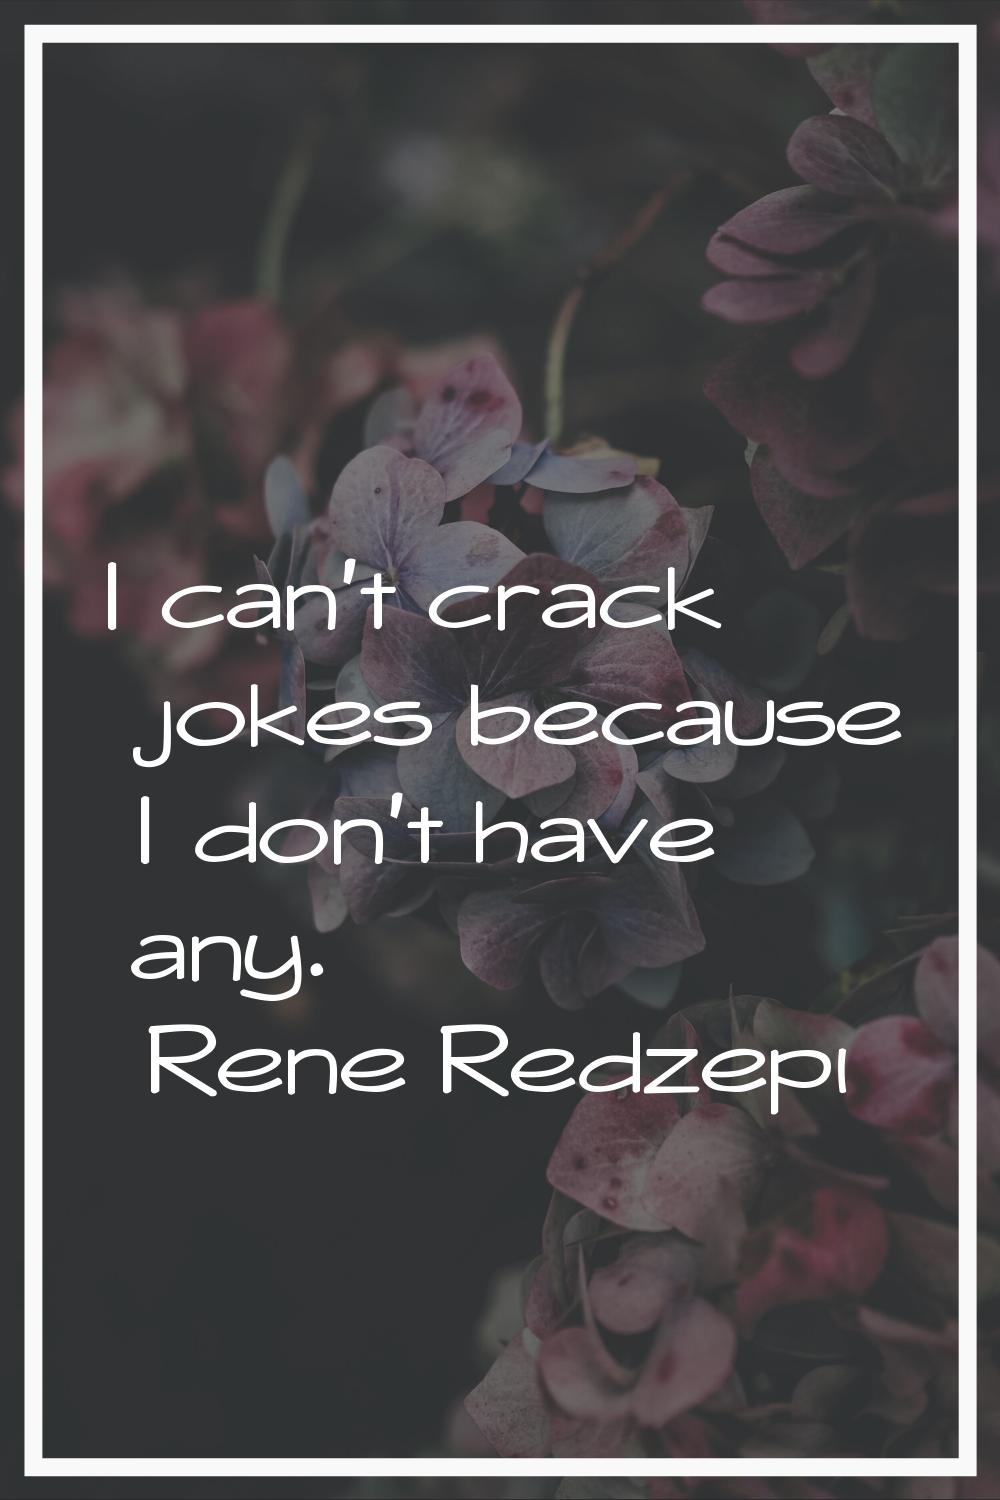 I can't crack jokes because I don't have any.